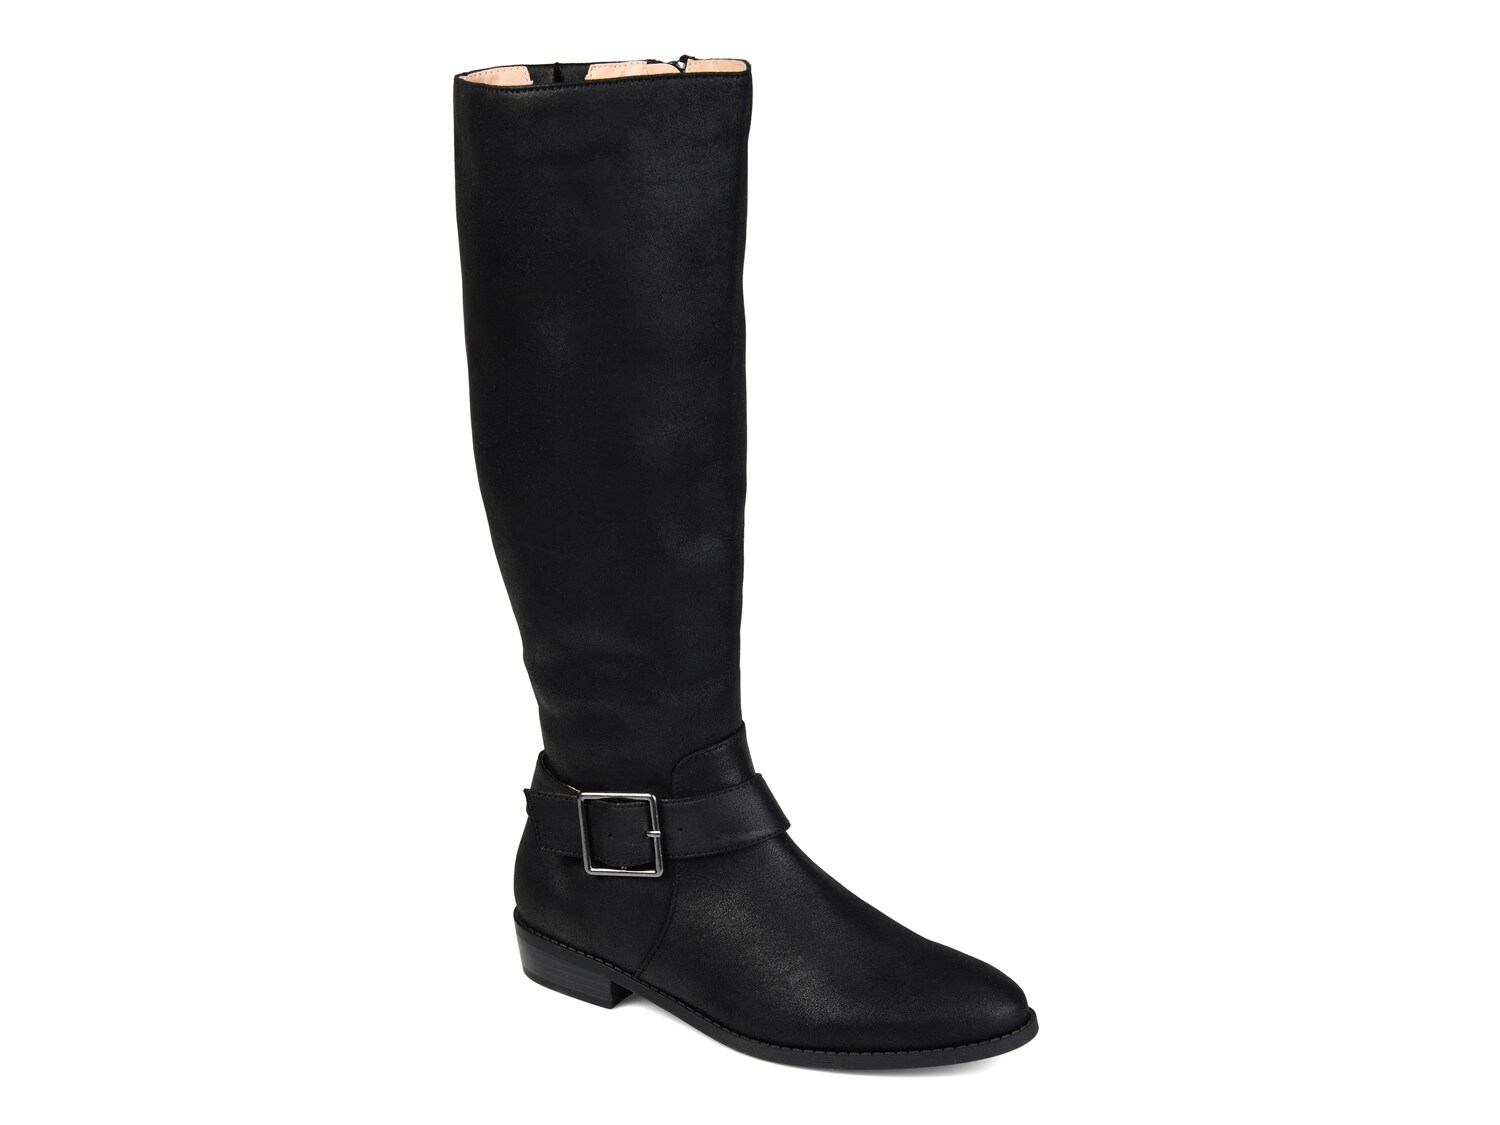 Journee Collection Winona Wide Calf Riding Boot - Free Shipping | DSW